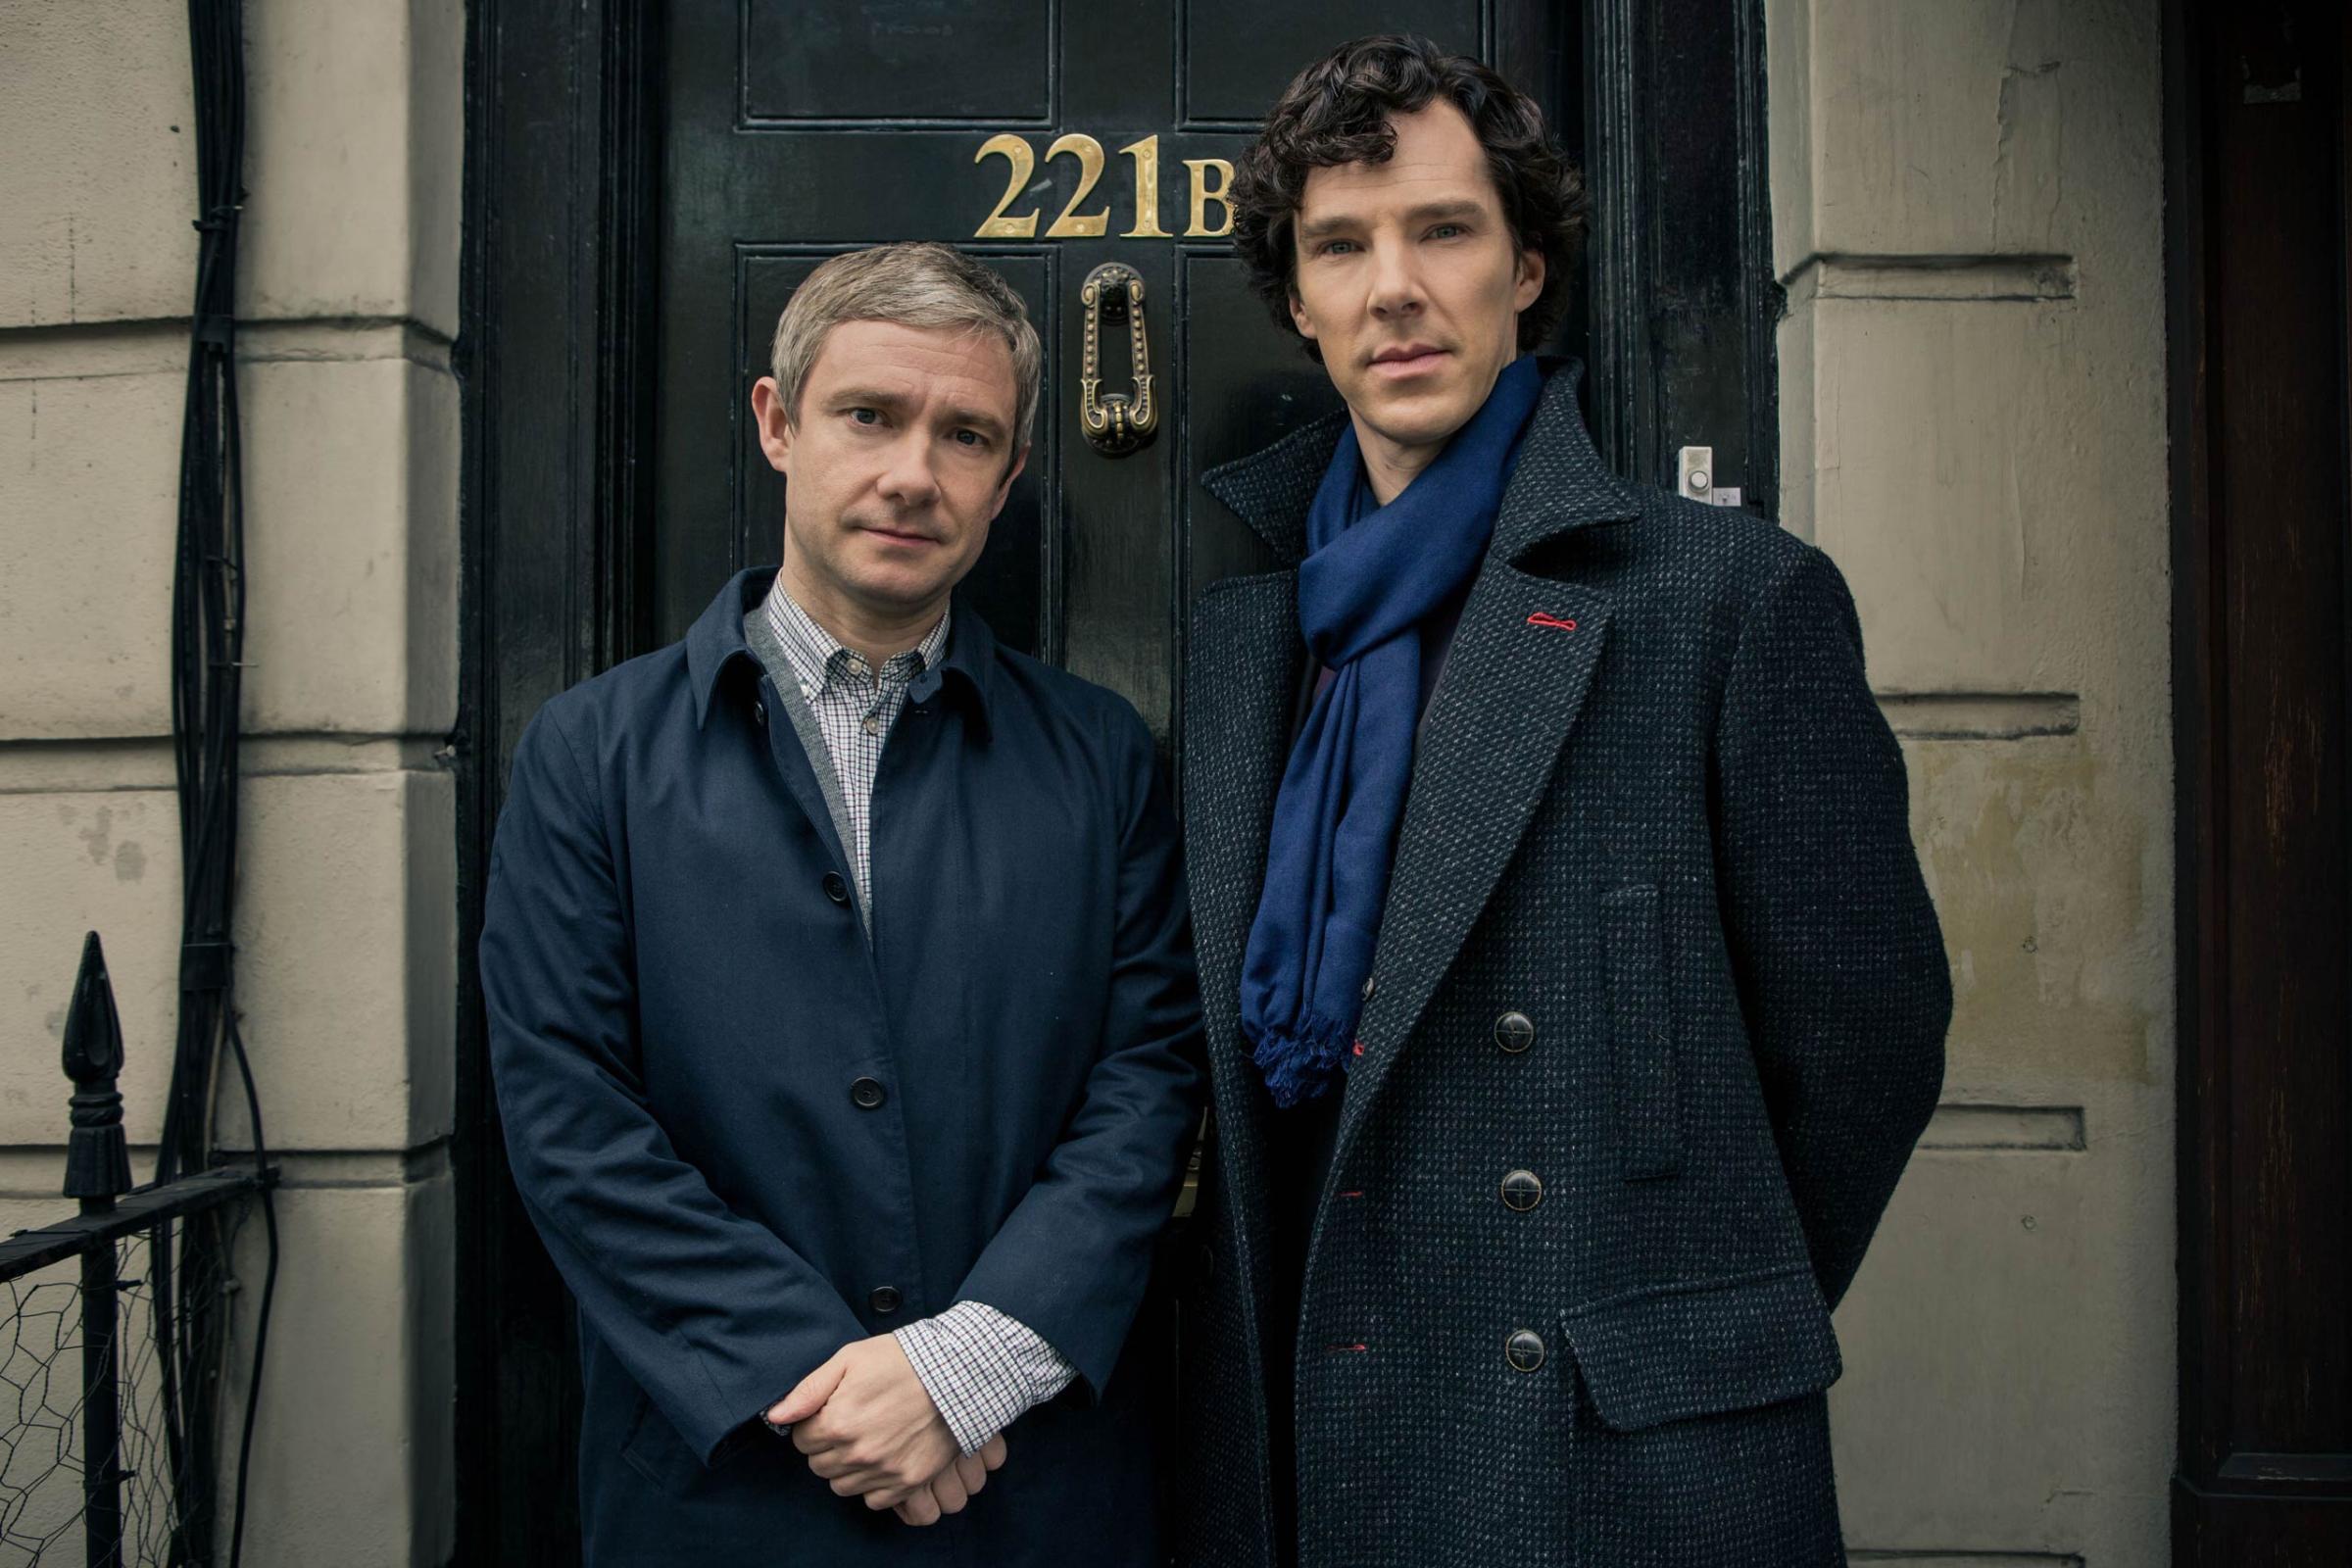 Sherlock Season 3Sundays January 19 - February 2, 201410pm ET on MASTERPIECE on PBSSherlock Holmes stalks again in a third season of the hit modern version of the Arthur Conan Doyle classic, starring Benedict Cumberbatch (War Horse) as the go-to consulting detective in 21st-century London and Martin Freeman (The Hobbit) as his loyal friend, Dr. John Watson.Shown from left to right: Martin Freeman as Dr. John Watson and Benedict Cumberbatch as Sherlock Holmes(C)Robert Viglasky/Hartswood Films for MASTERPIECEThis image may be used only in the direct promotion of MASTERPIECE. No other rights are granted. All rights are reserved. Editorial use only.